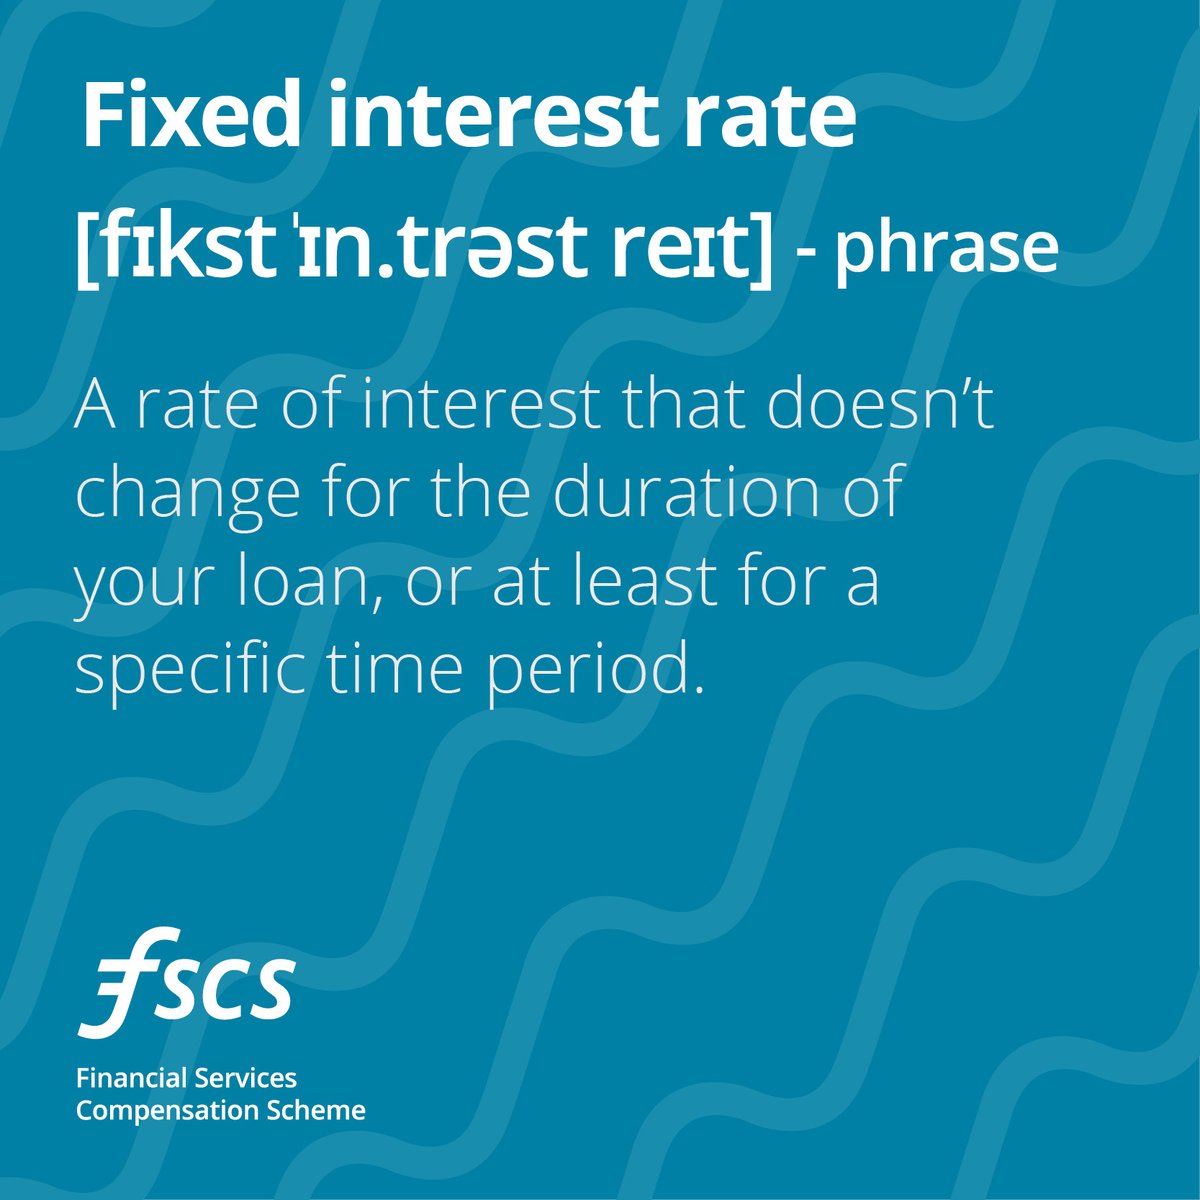 Interested in learning more about.... interest rates? 🤔We’re here to help with this #JargonBuster. Whatever kind of #InterestRate you choose to go for, if you're looking for a new home, it’s good to know we can provide mortgage protection too 🏠 Find out more: